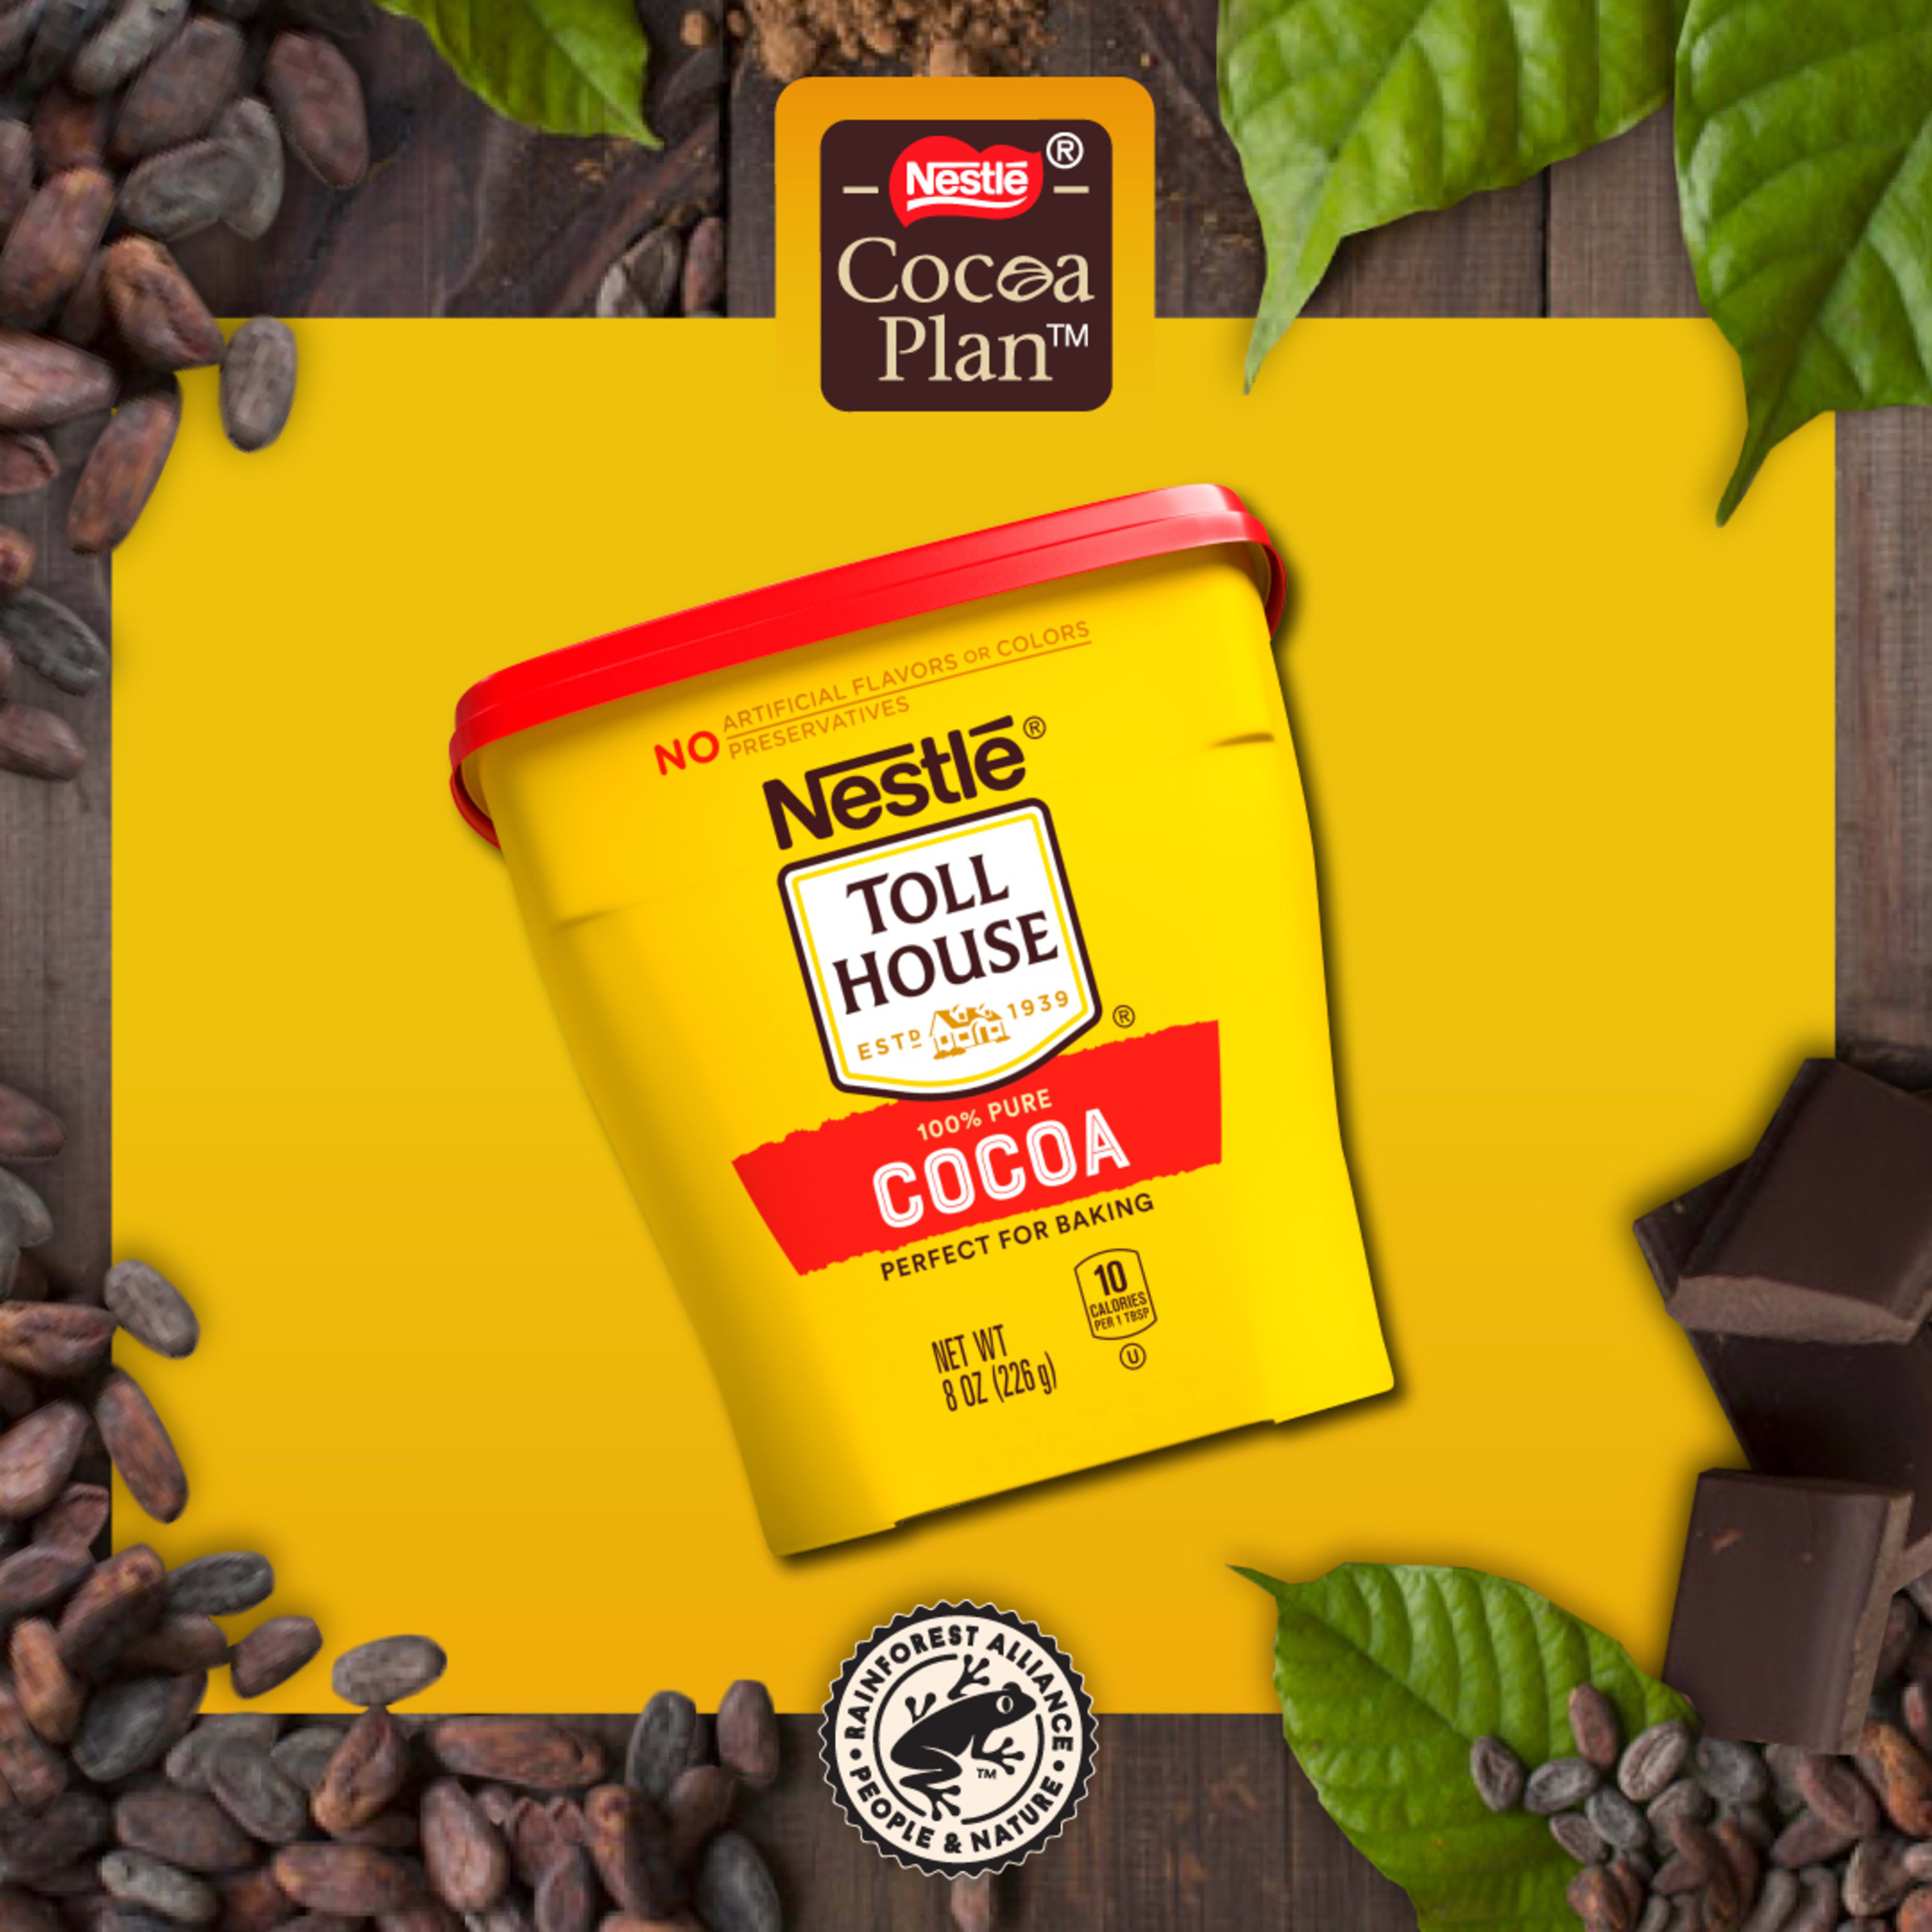 Nestle Toll House 100% Pure Cocoa, Deep Chocolate Flavor Poweder, 8 oz Box - image 5 of 10